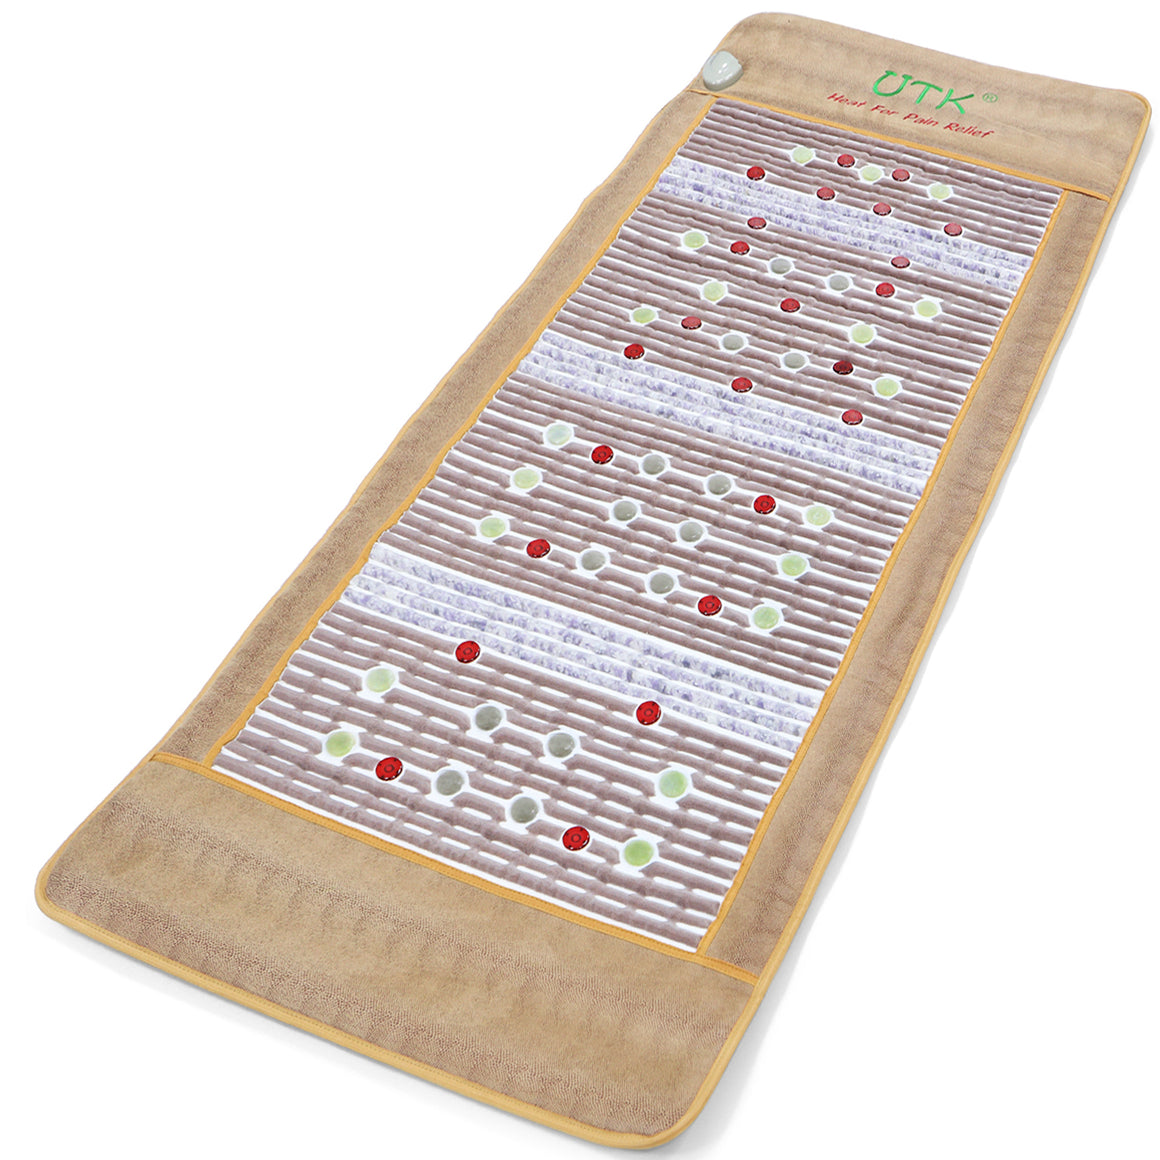 UTK Photon Infrared Heating Mat - Far Infrared Heating Pad with Jade, Amethyst and Tourmaline, 24 Photon Red Light Therapy